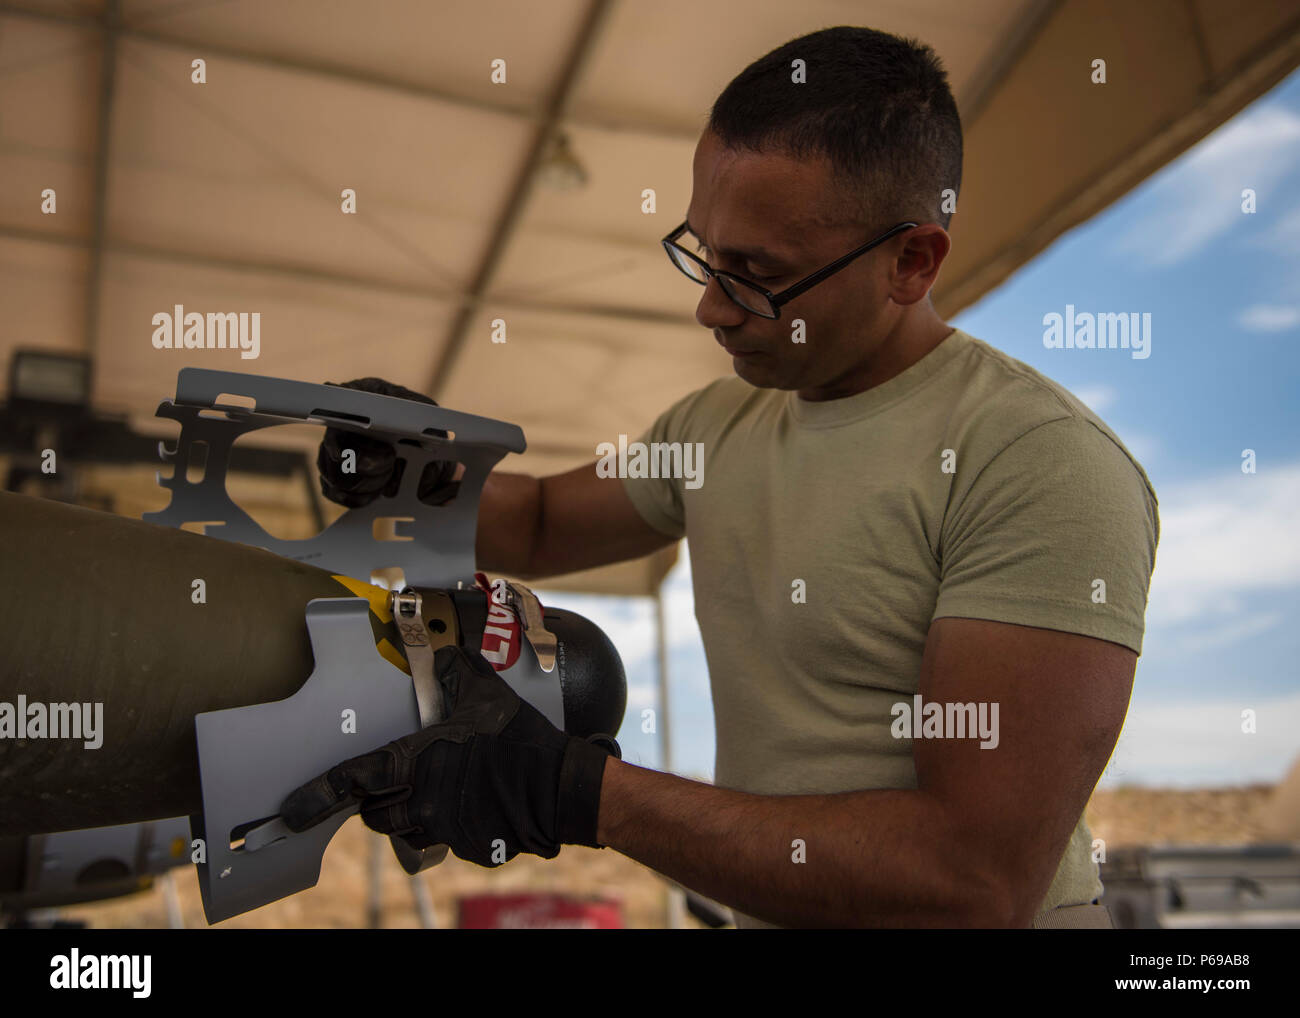 Staff Sgt. Alejandro Medina, 455th Expeditionary Maintenance Squadron Munitions Flight munitions system specialist, helps build a GBU-54 munition at Bagram Airfield, Afghanistan, May 26, 2016. Munitions systems specialists handle, store, transport, arm and disarm weapons systems. (U.S. Air Force photo by Senior Airman Justyn M. Freeman) Stock Photo